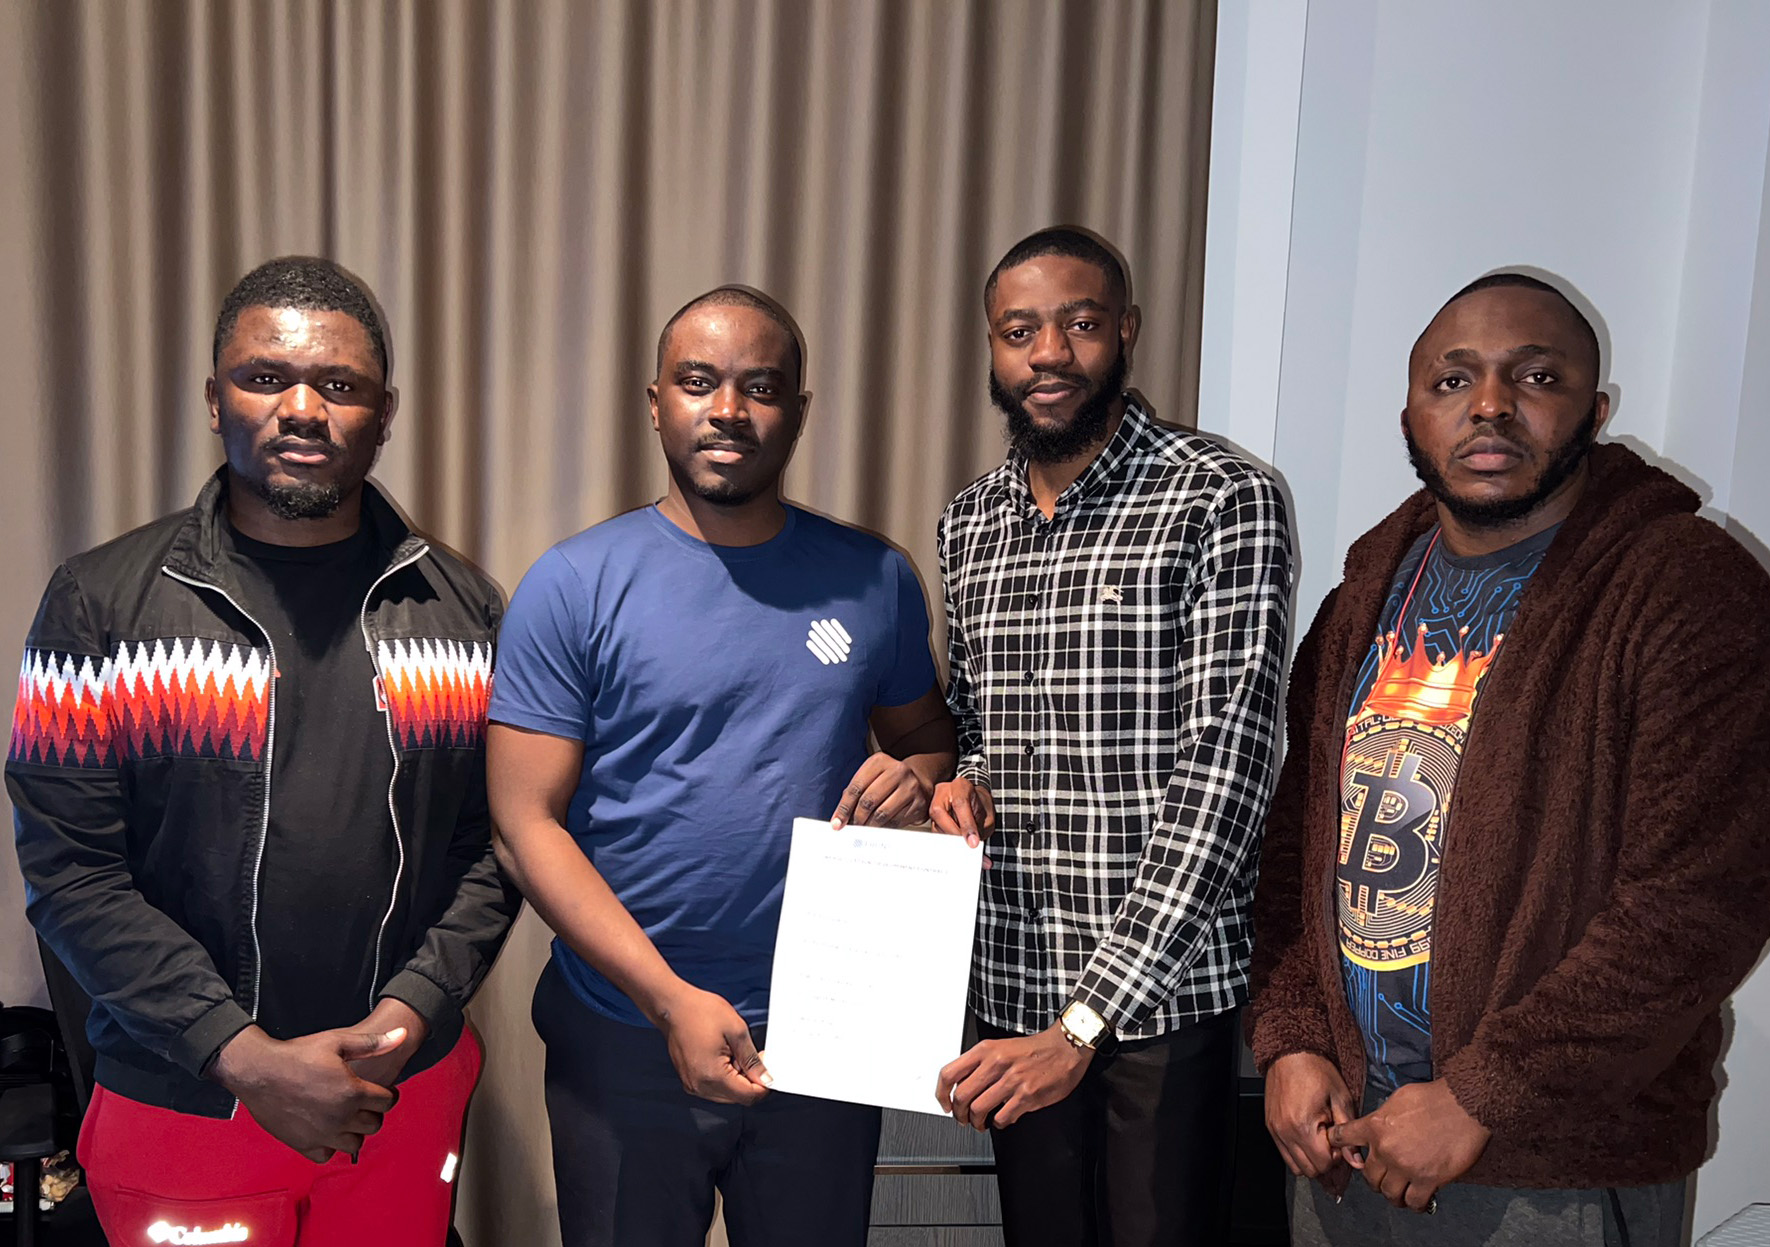 Frontdreams Enters into Long-Term Partnership with Congolese Startup, VeridoCongo, Developed and Launched Innovative Document Verification System